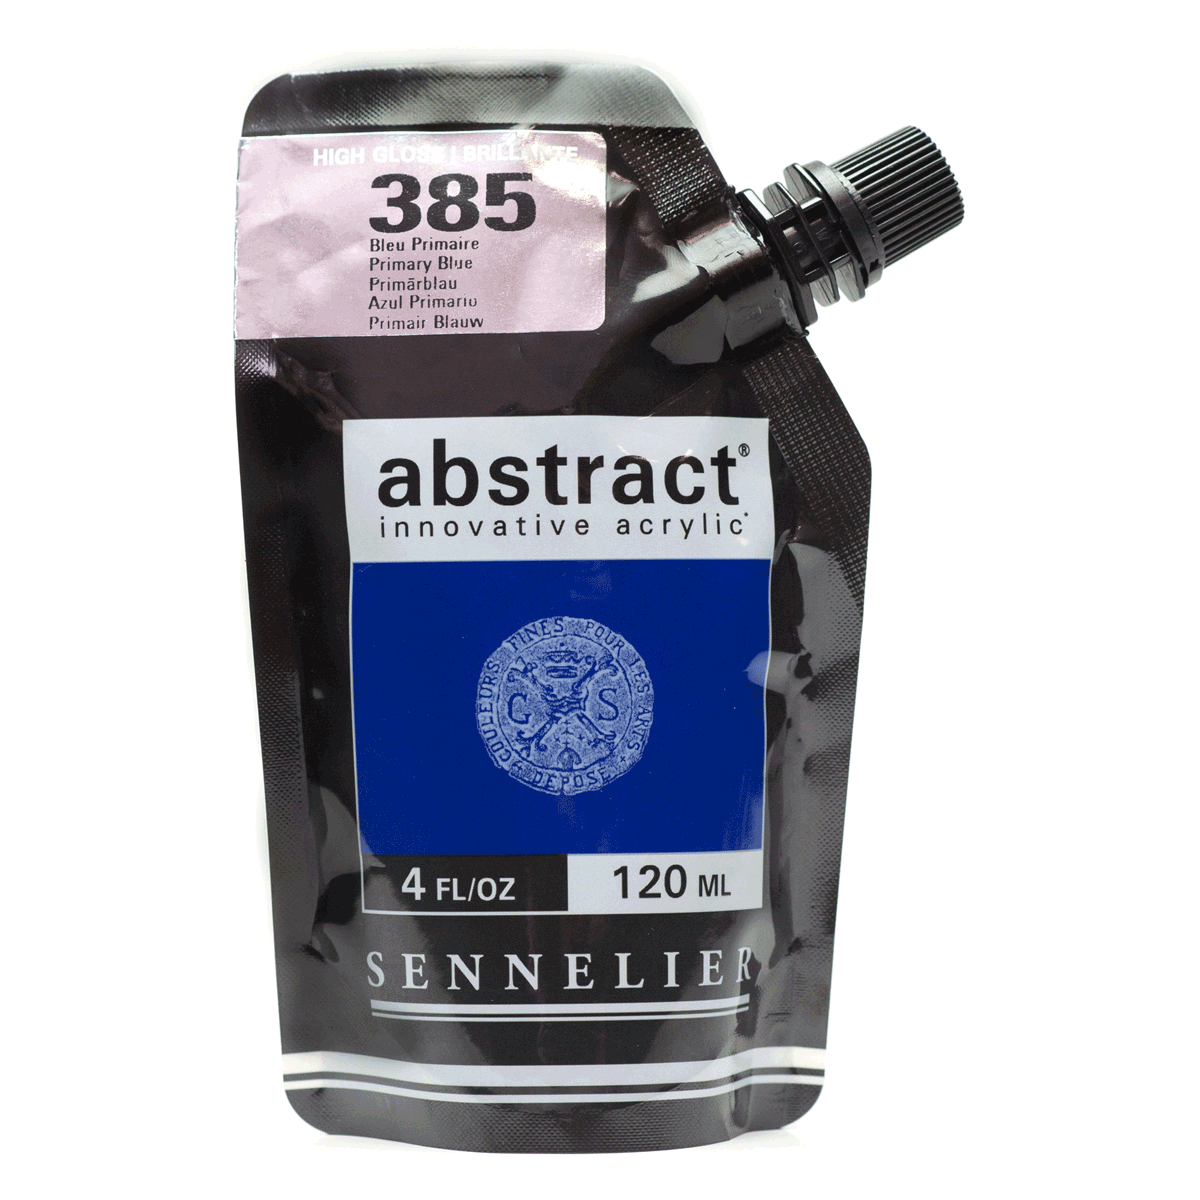 Sennelier Abstract Acrylic Paint Pouch - High Gloss 385B Primary Blue 120ml